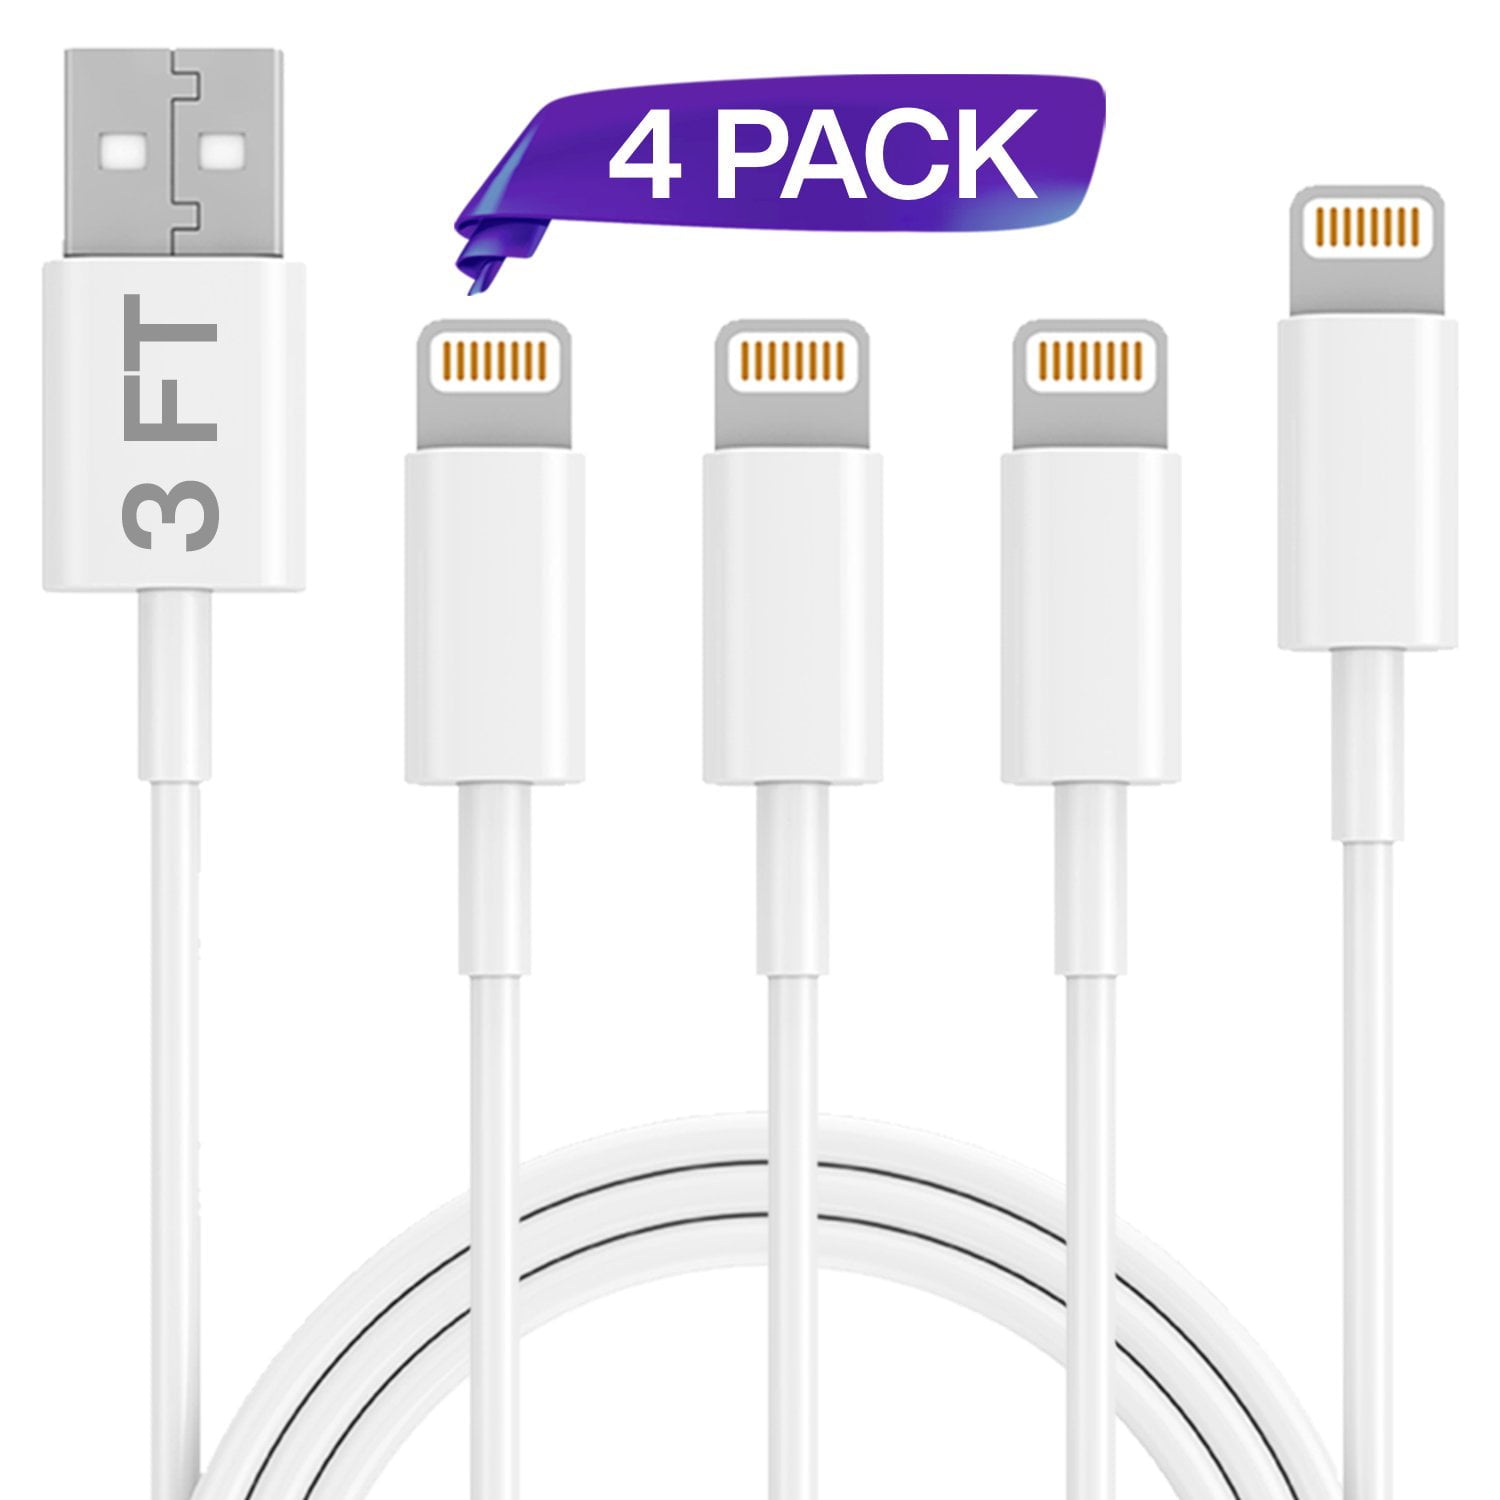 Cherry Sturdy and Durable Flexible White Charging Cable for Aple Compatible Devices 4 Pcs Set